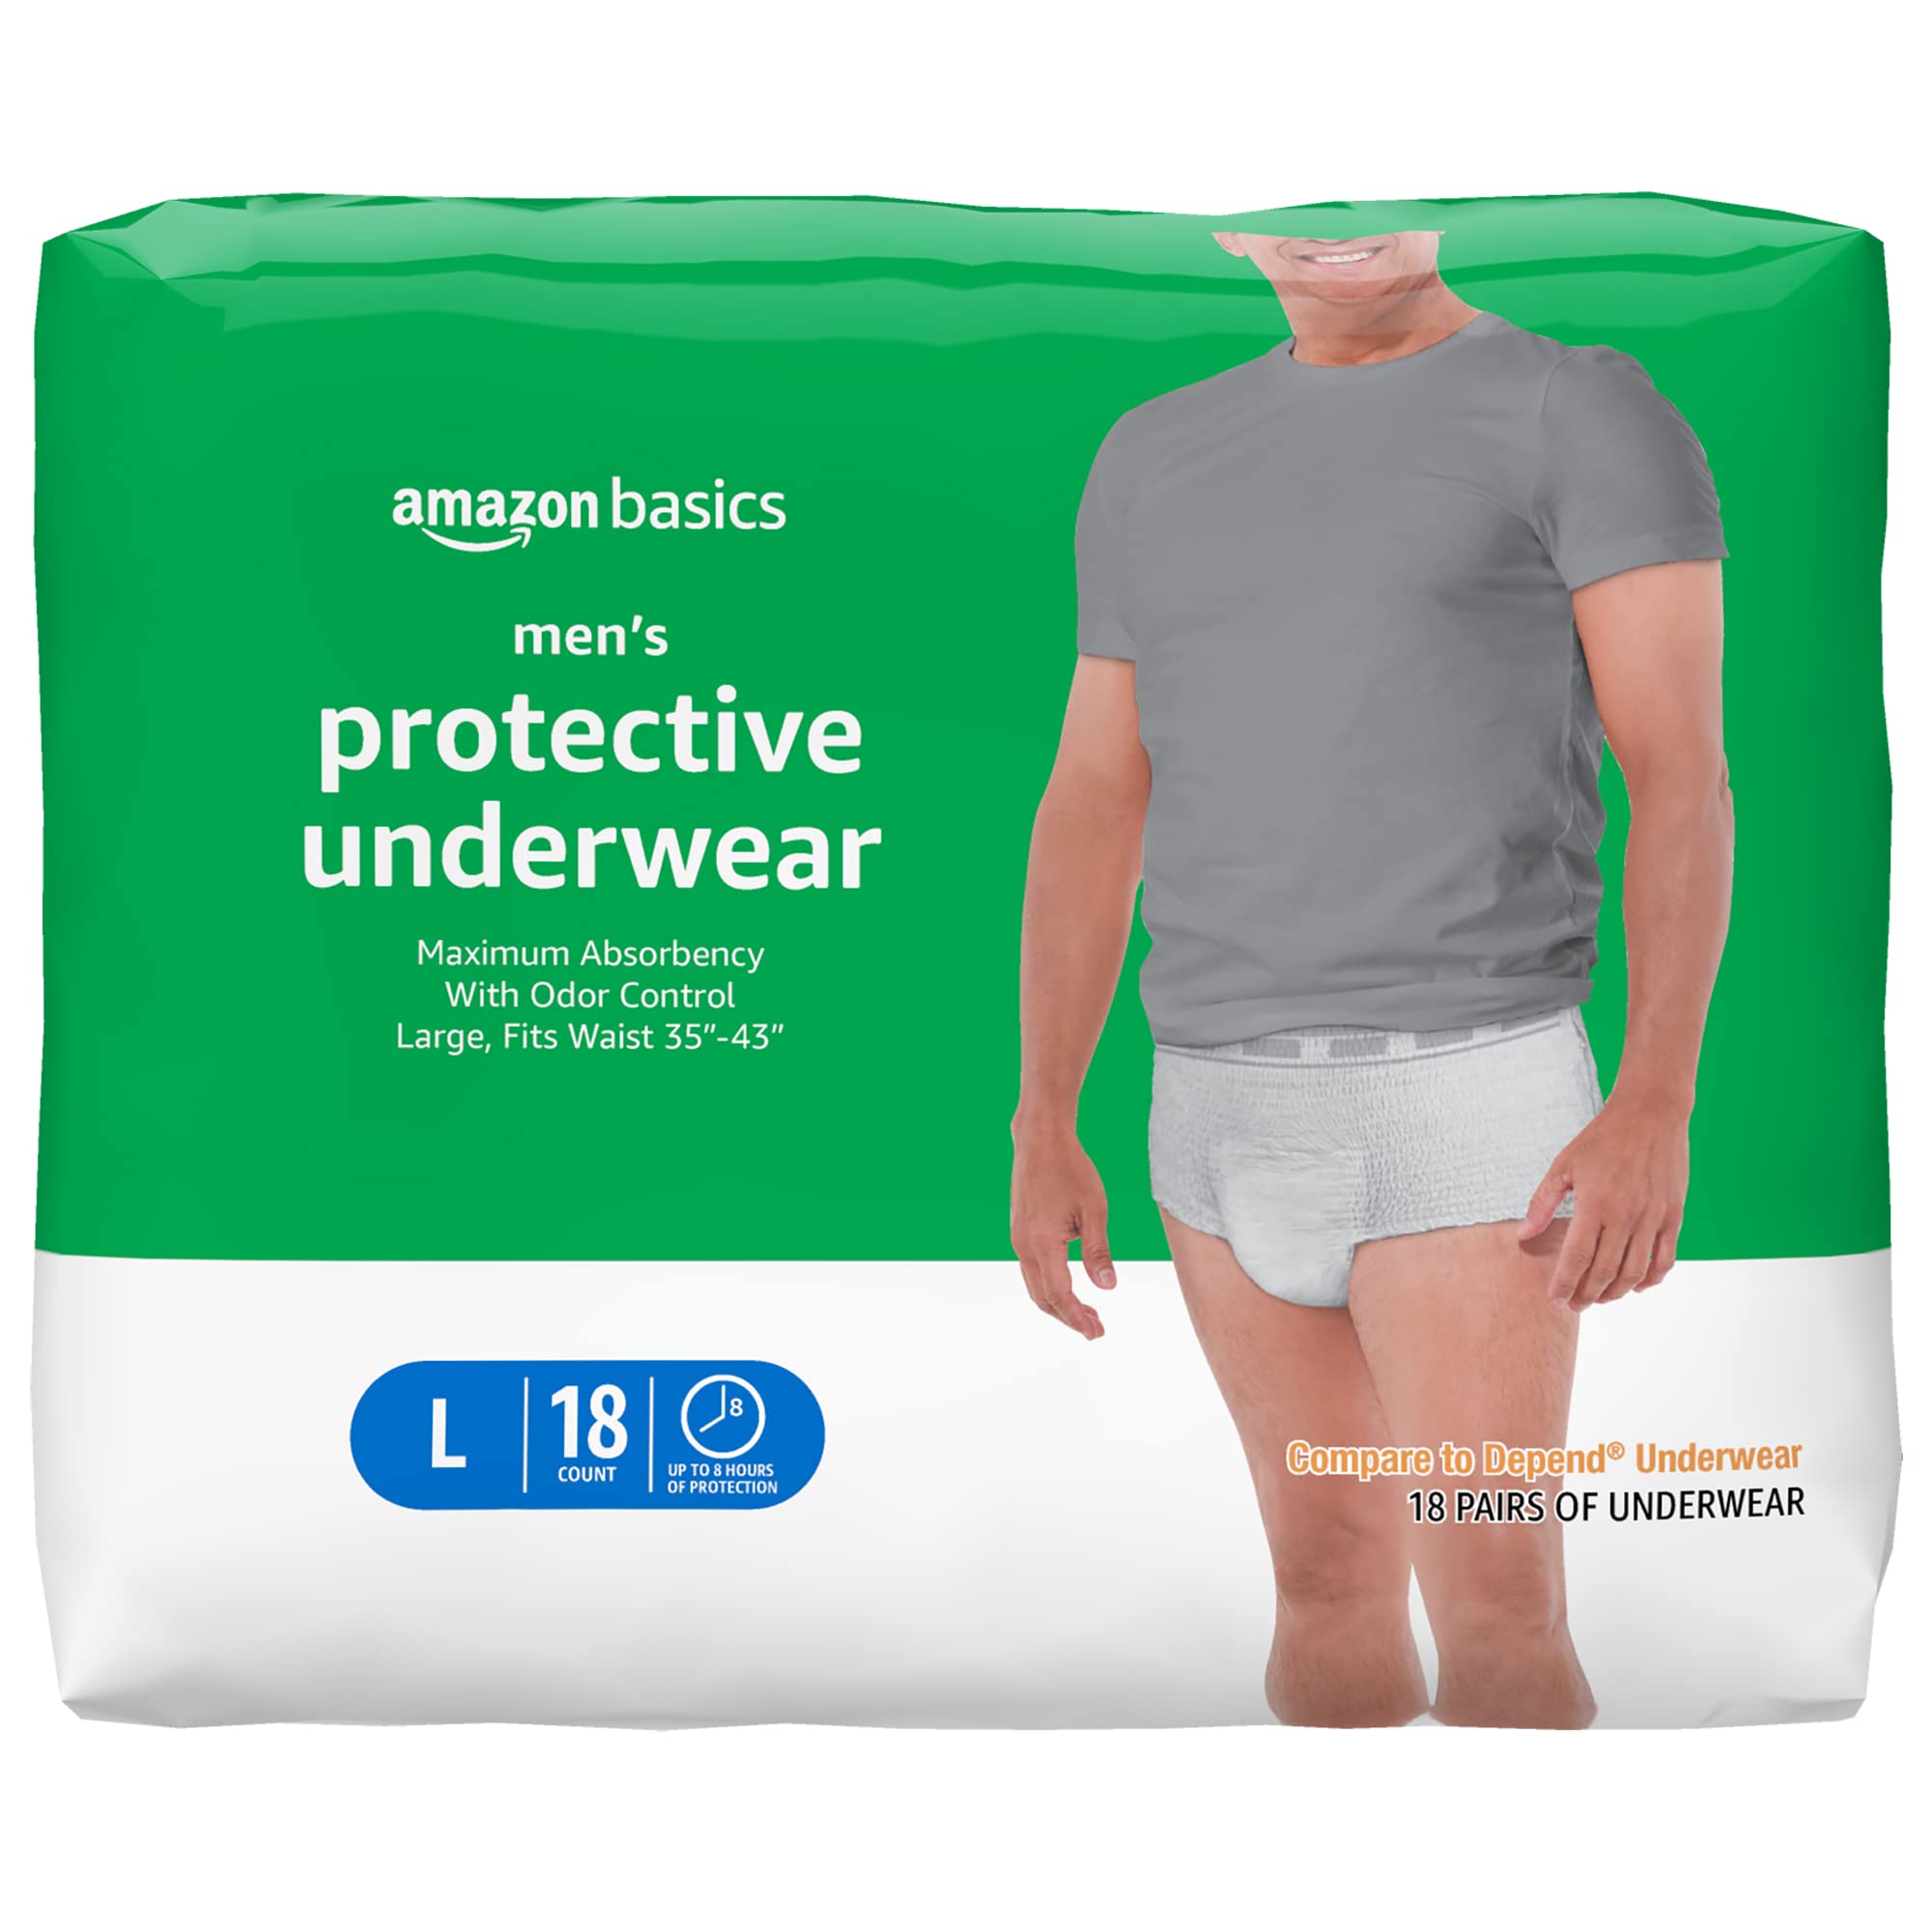 Women's Protective Underwear Max Absorbency  Basics Size Med 60 Pairs